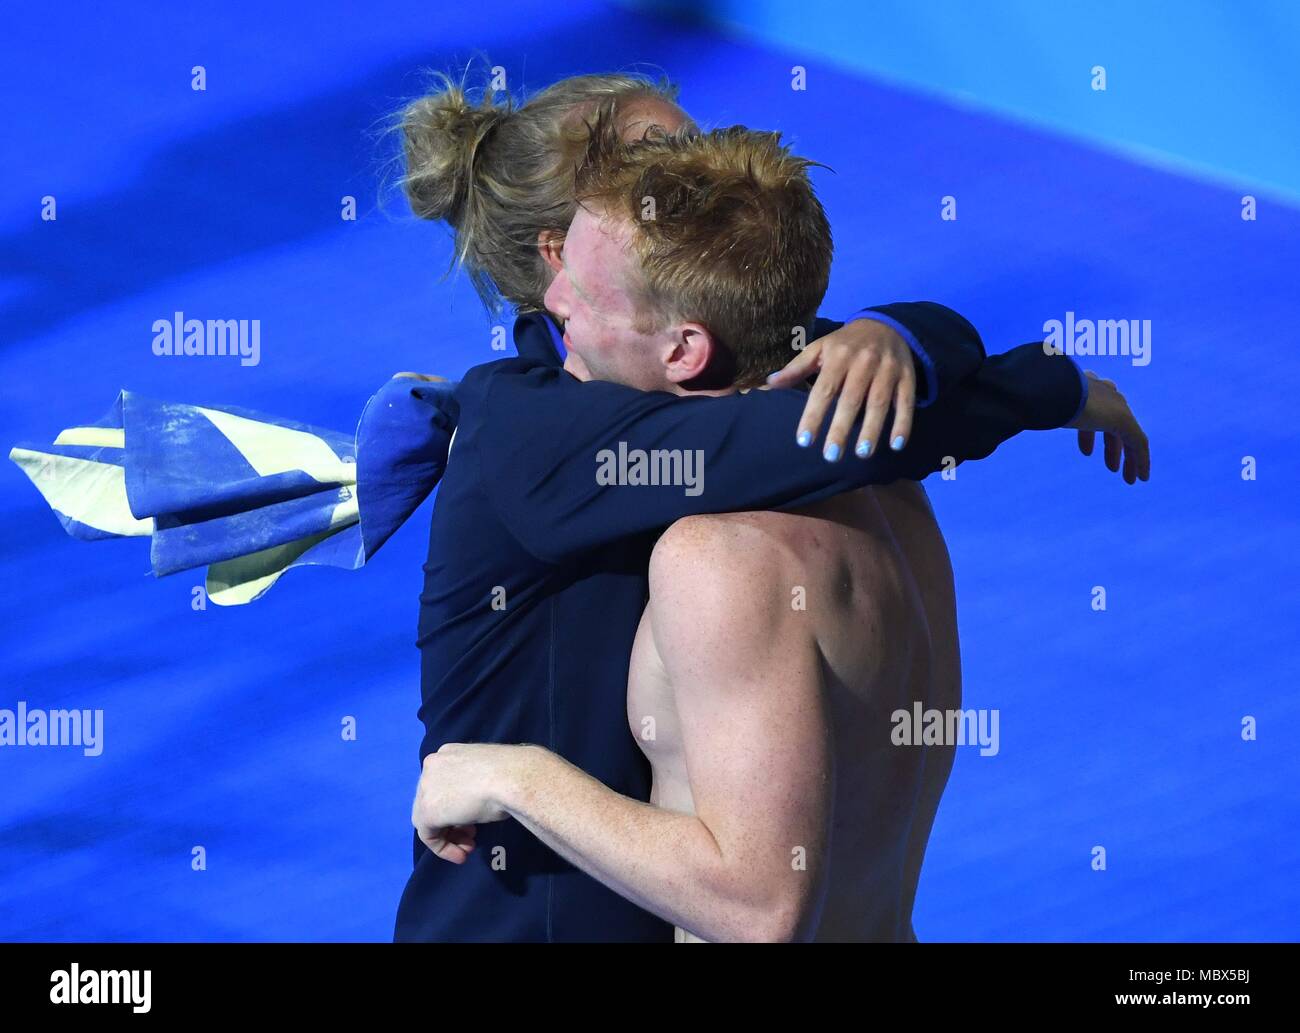 Queensland, Australia. 11th April, 2018. James HEATLY (SCO) is congratulated. Diving. Mens 1m springboard final. XXI Commonwealth games. Oxenford studios. Gold Coast 2018. Queensland. Australia. 11/04/2018. Credit: Sport In Pictures/Alamy Live News Stock Photo